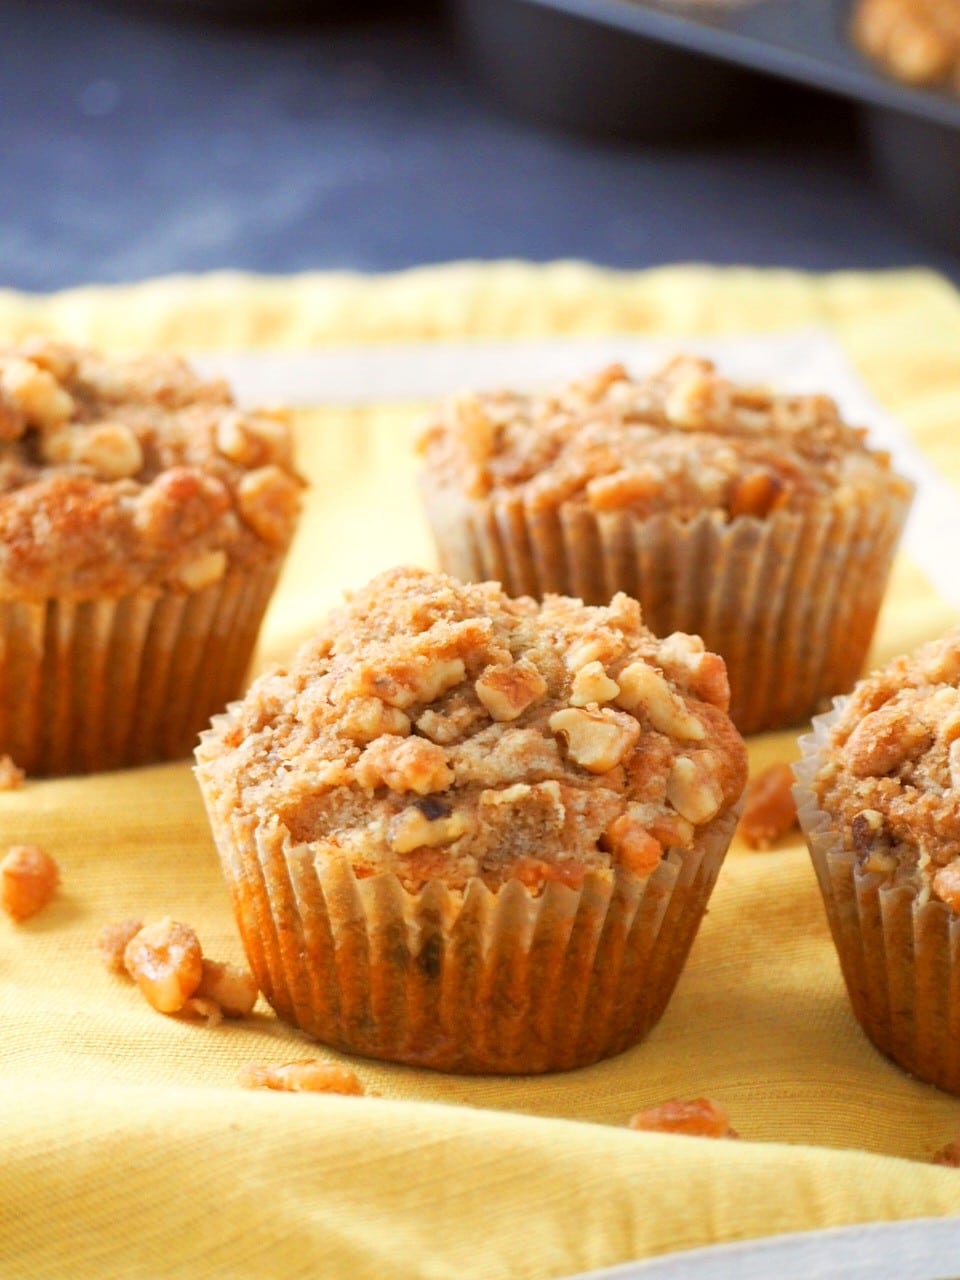 Banana Bread Cupcakes with Streusel Topping